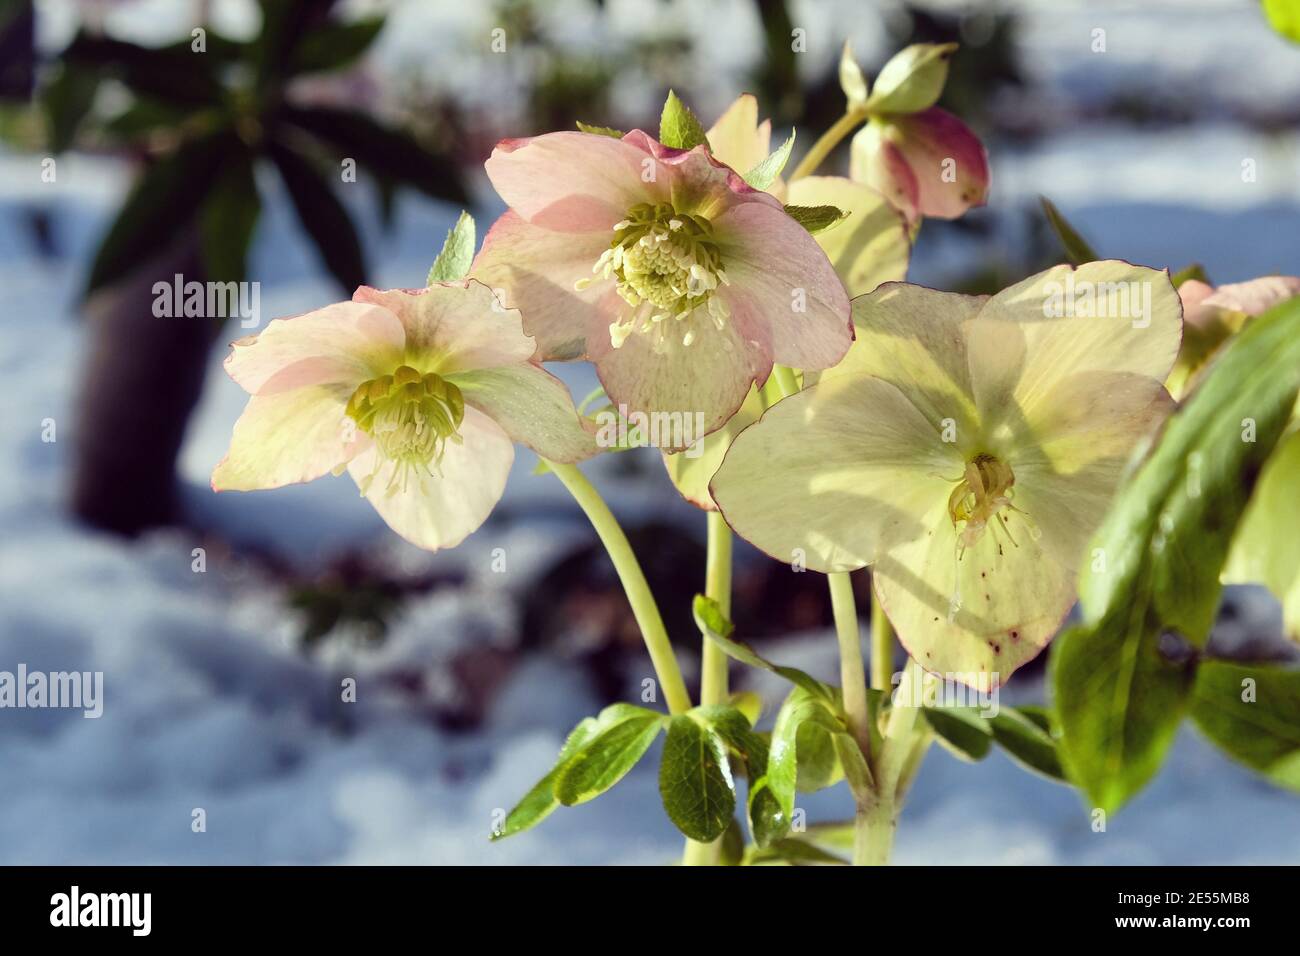 Pink and cream hellebores 'Lenten Rose' blooming through a snow covered ground Stock Photo